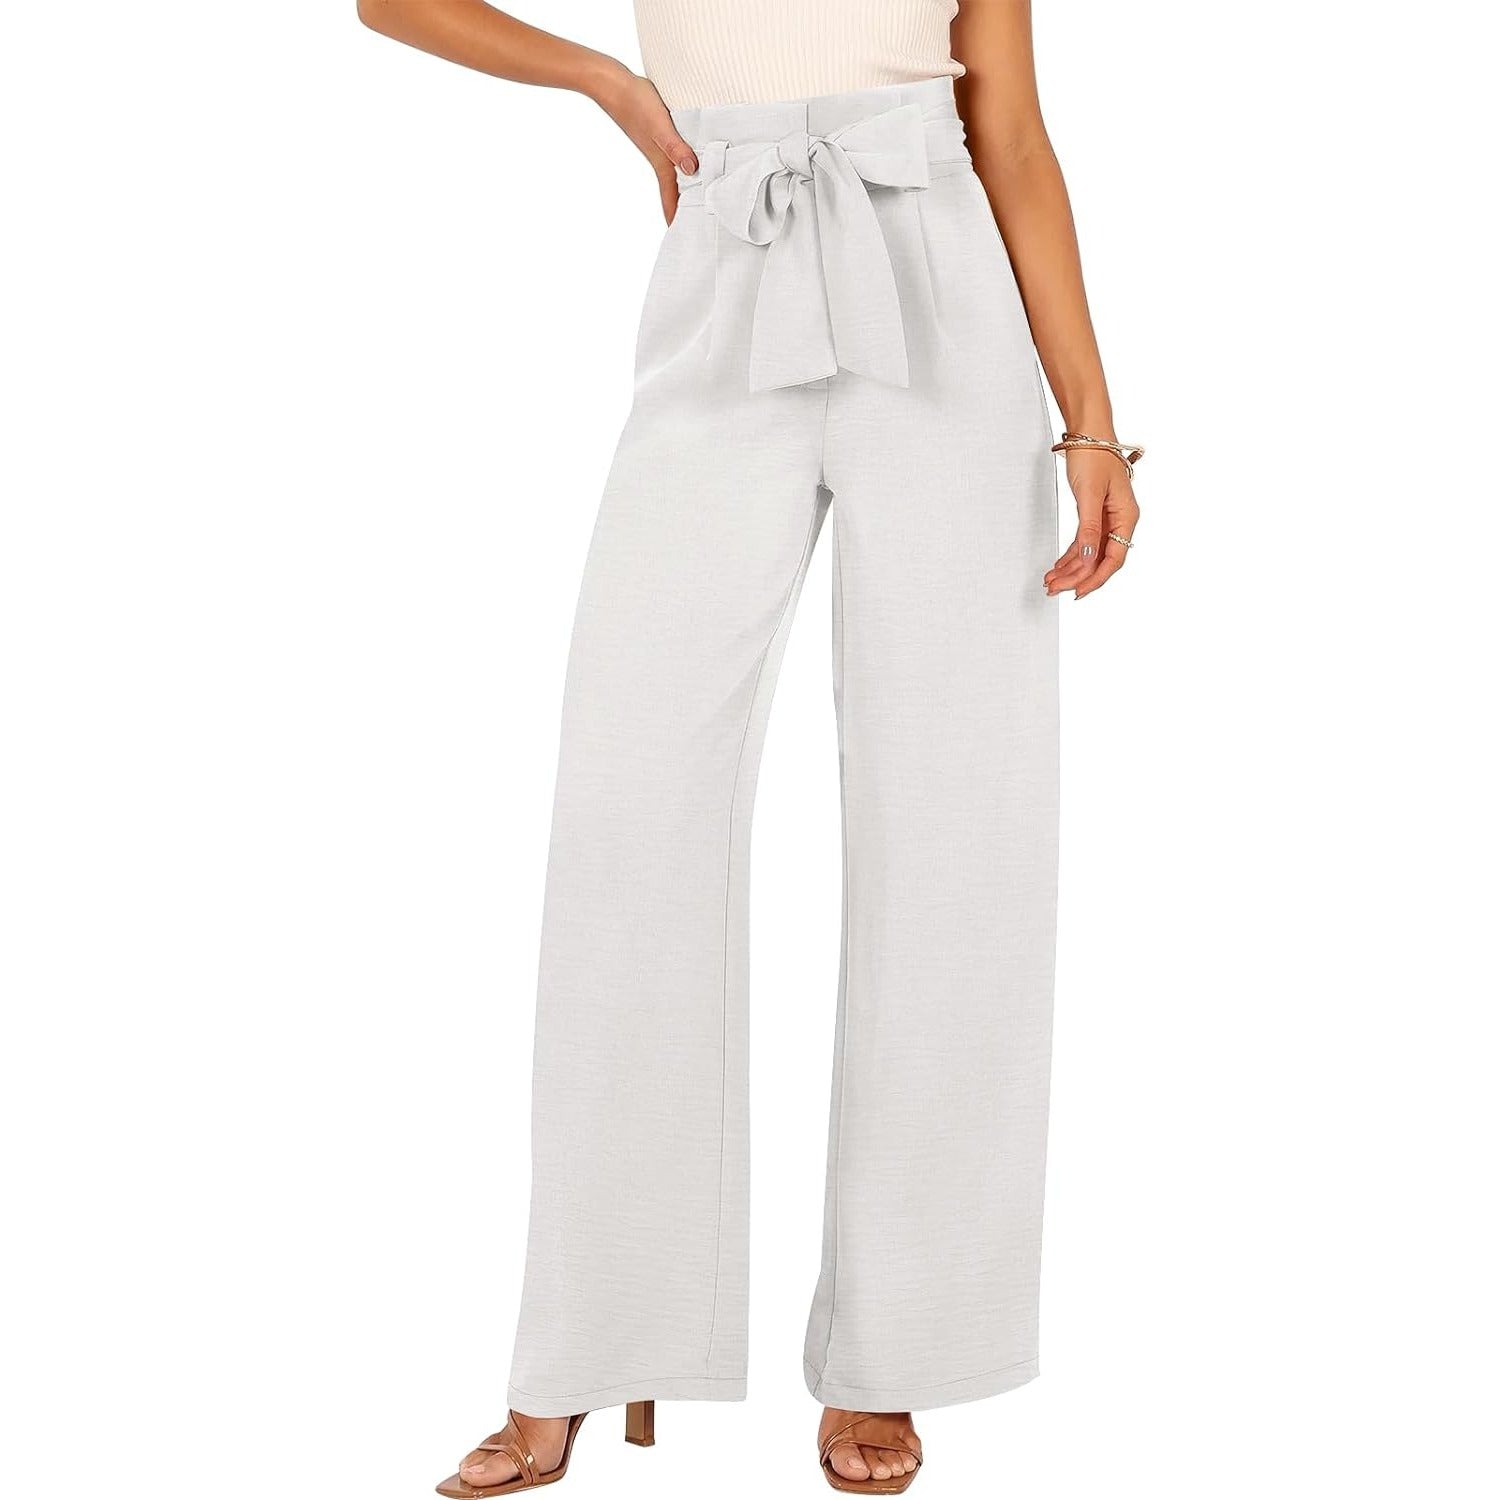 Womens Wide Leg Palazzo Pants Belted High Waisted Business Casual Long Trousers with Pockets